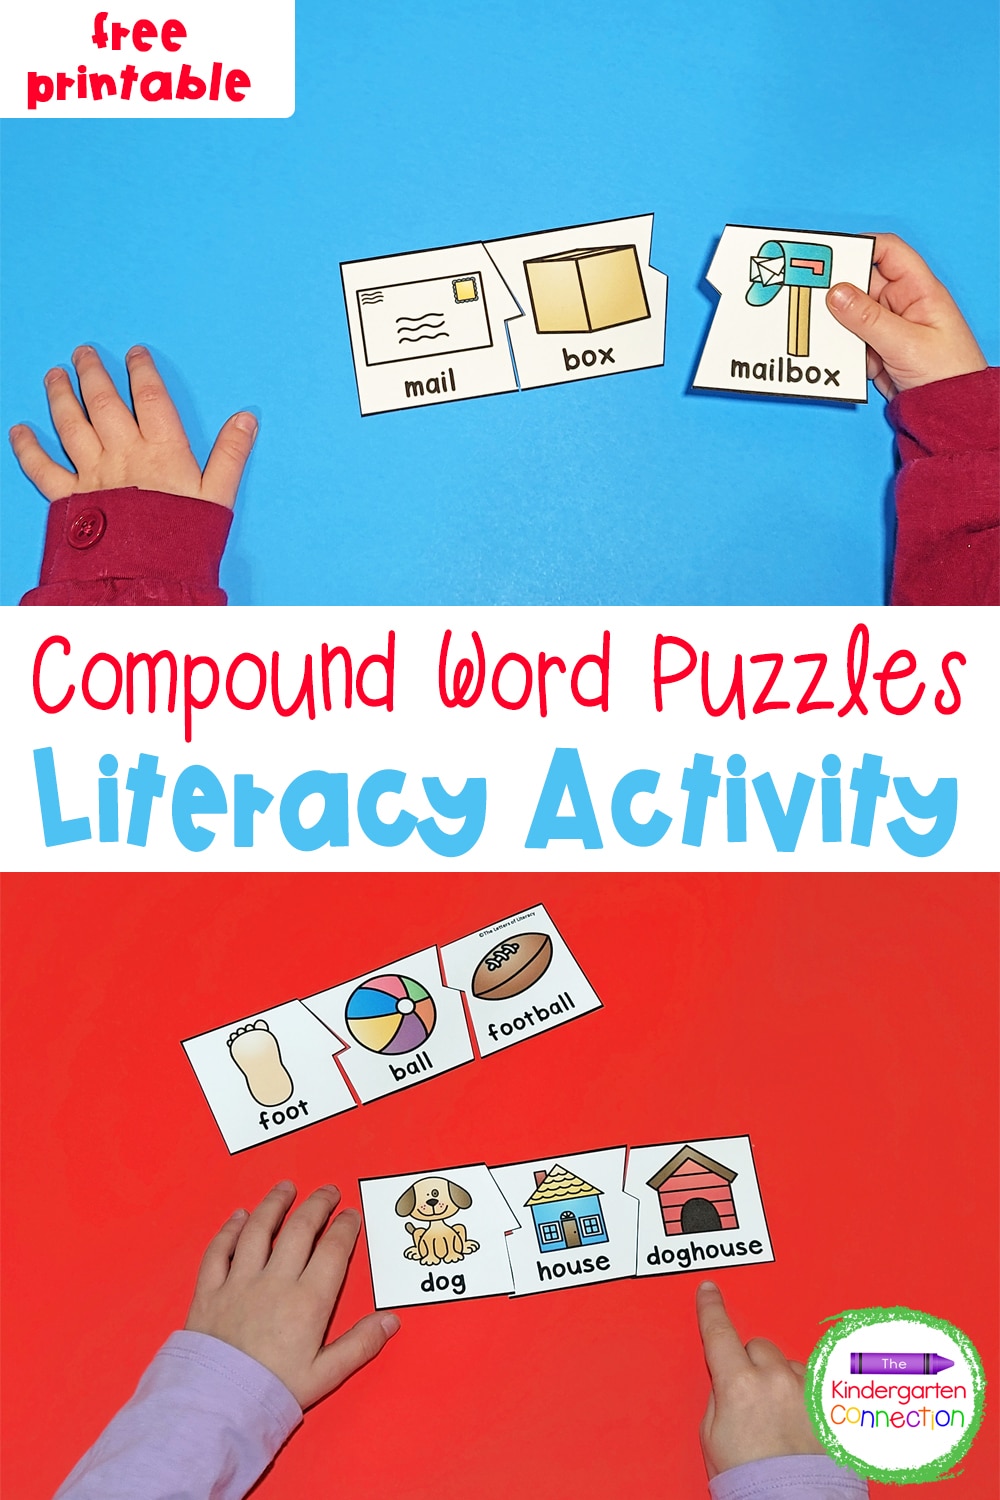 These free Compound Word Puzzles are perfect for early readers to build fluency and practice putting words together to make new ones!